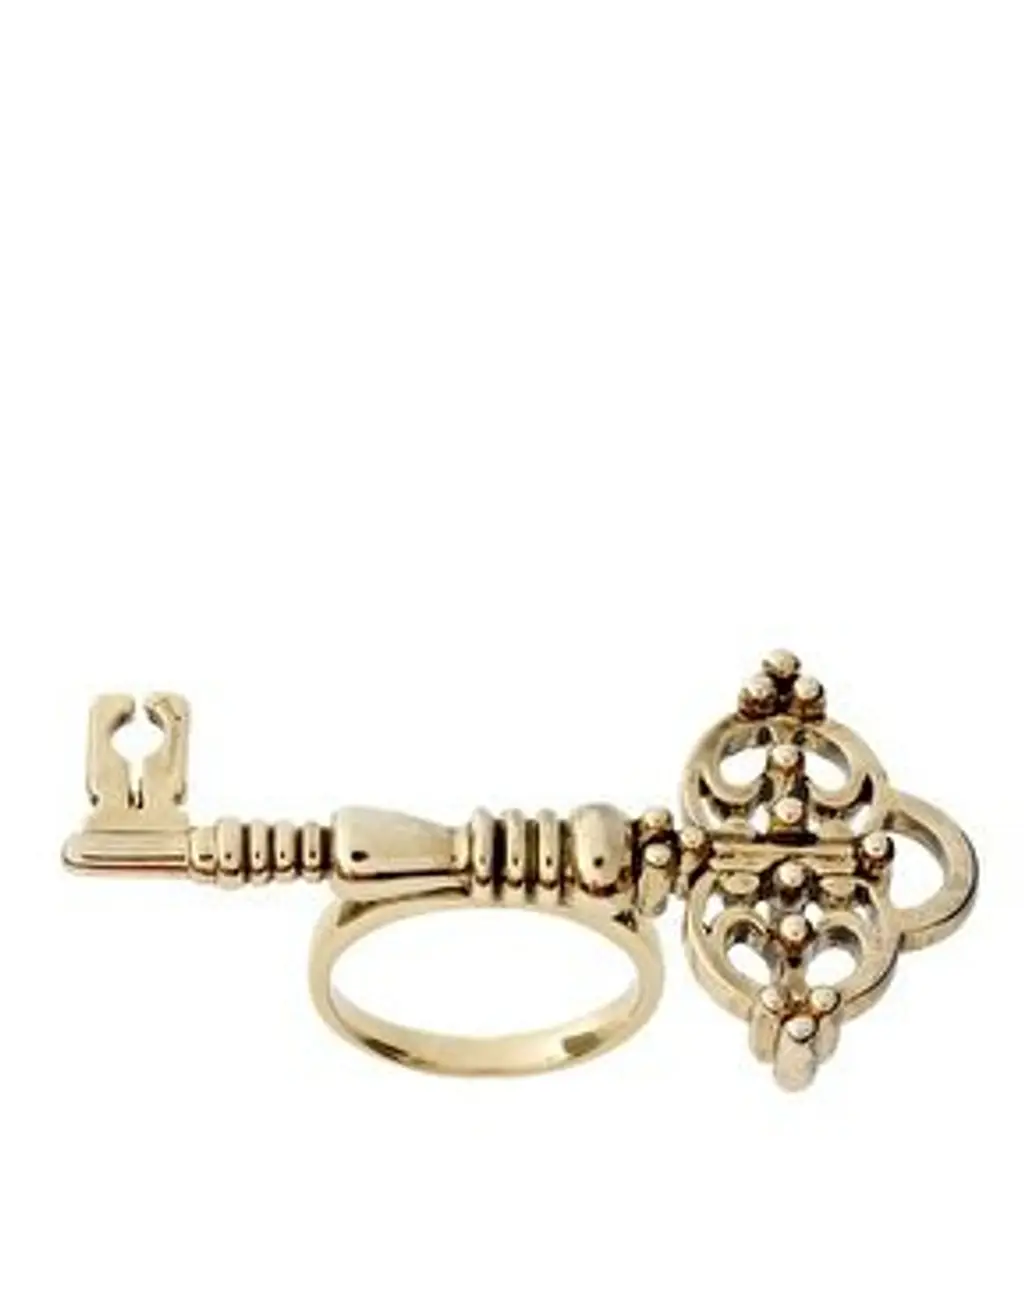 House of Harlow Large Key Cocktail Ring